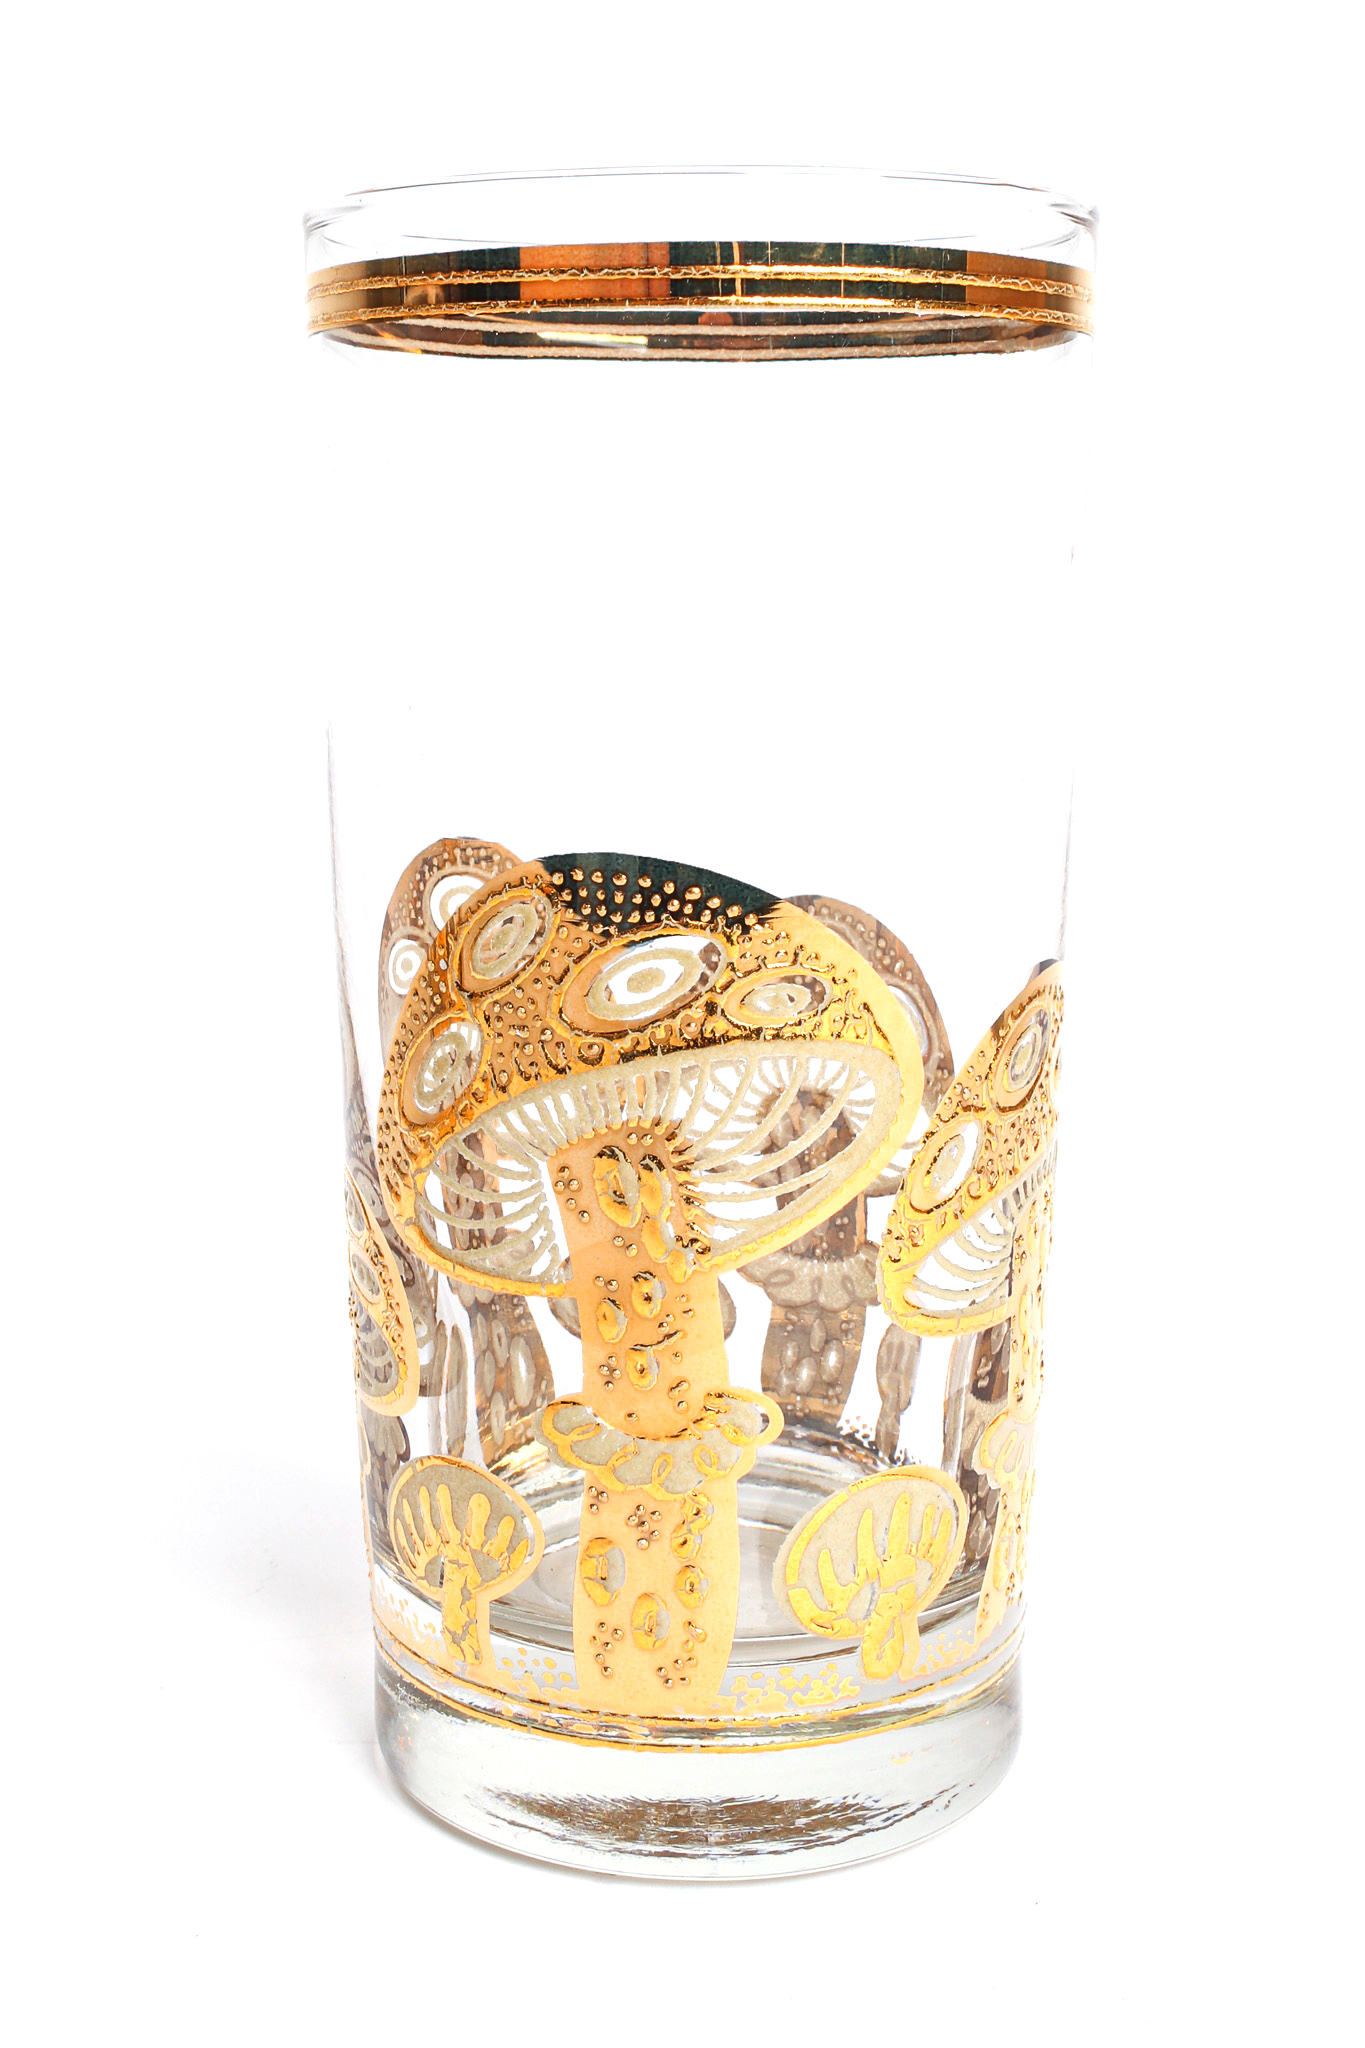 Gilded Mushroom Highball Glasses by Culver one large mushroom from front @recessla